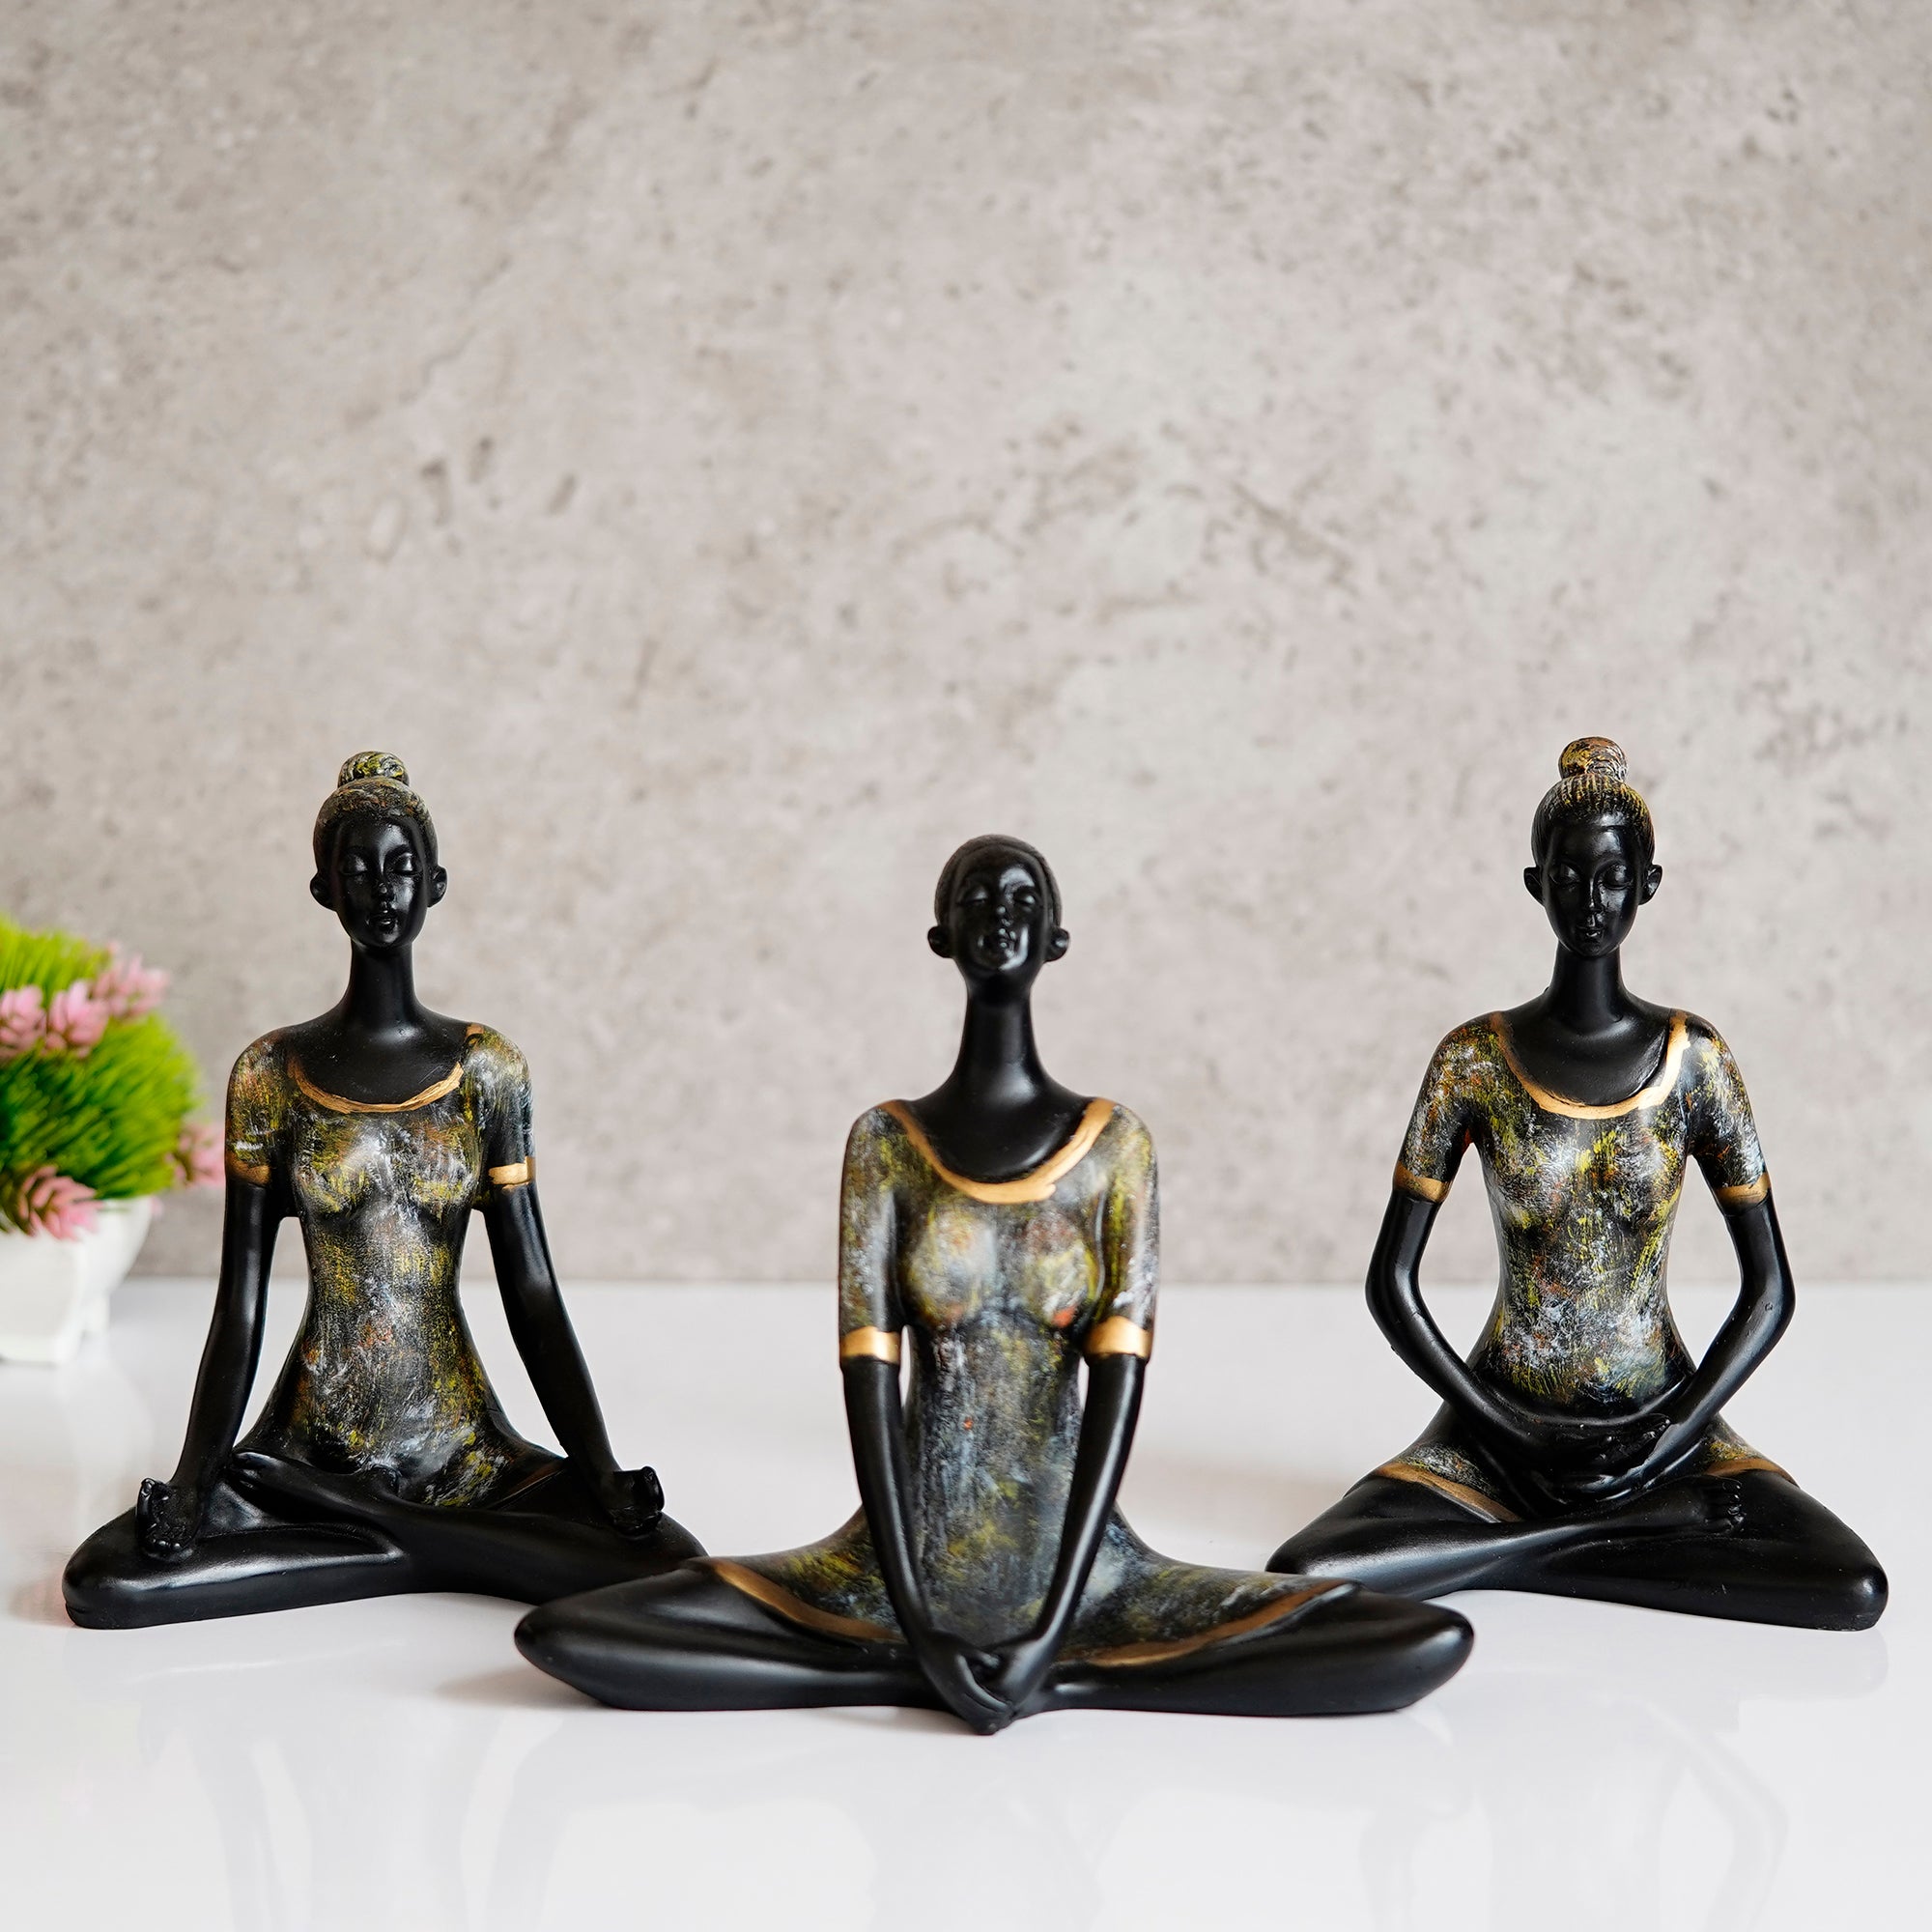 Set of 3 Ladies in Sukhasana, Padmasana, Butterfly Yoga Poses Handcrafted Decorative Polyresin Showpieces 1